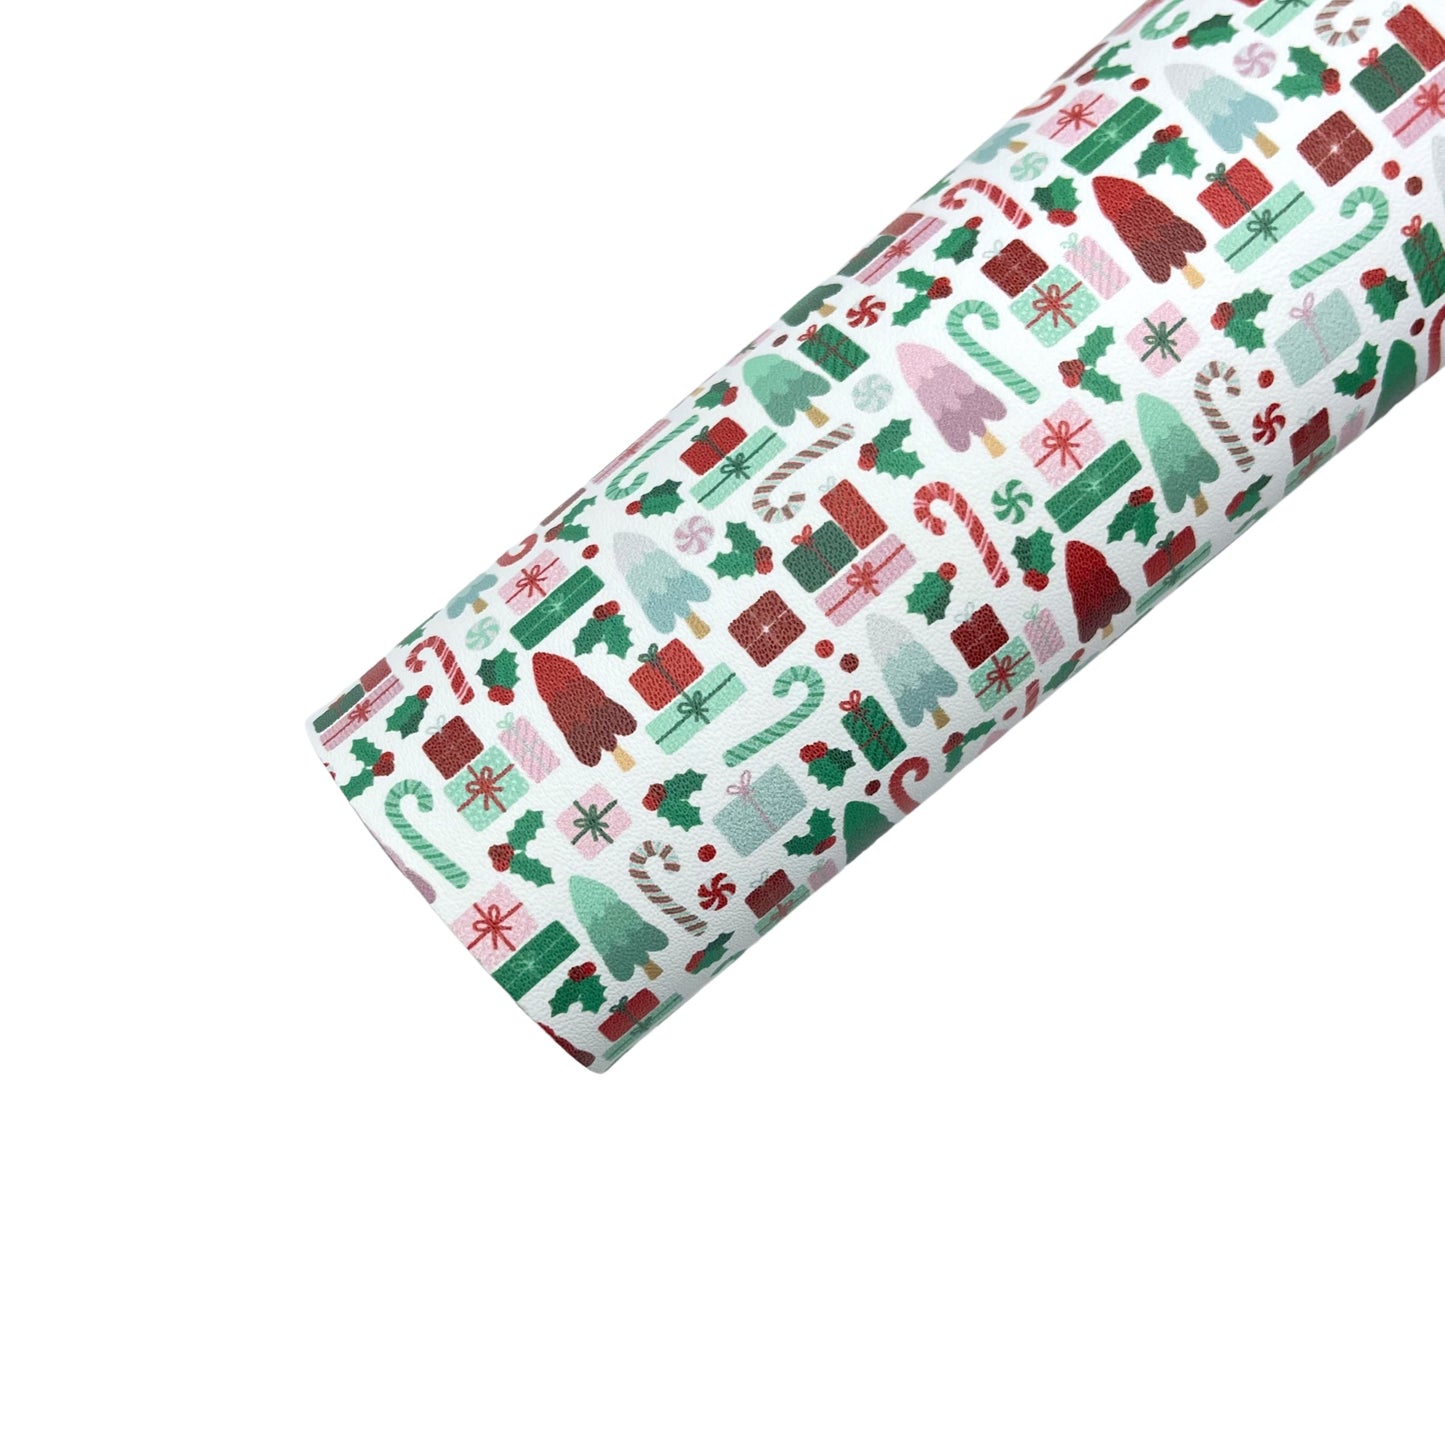 Winter Christmas Prints | Faux Leather Fabric Sheets